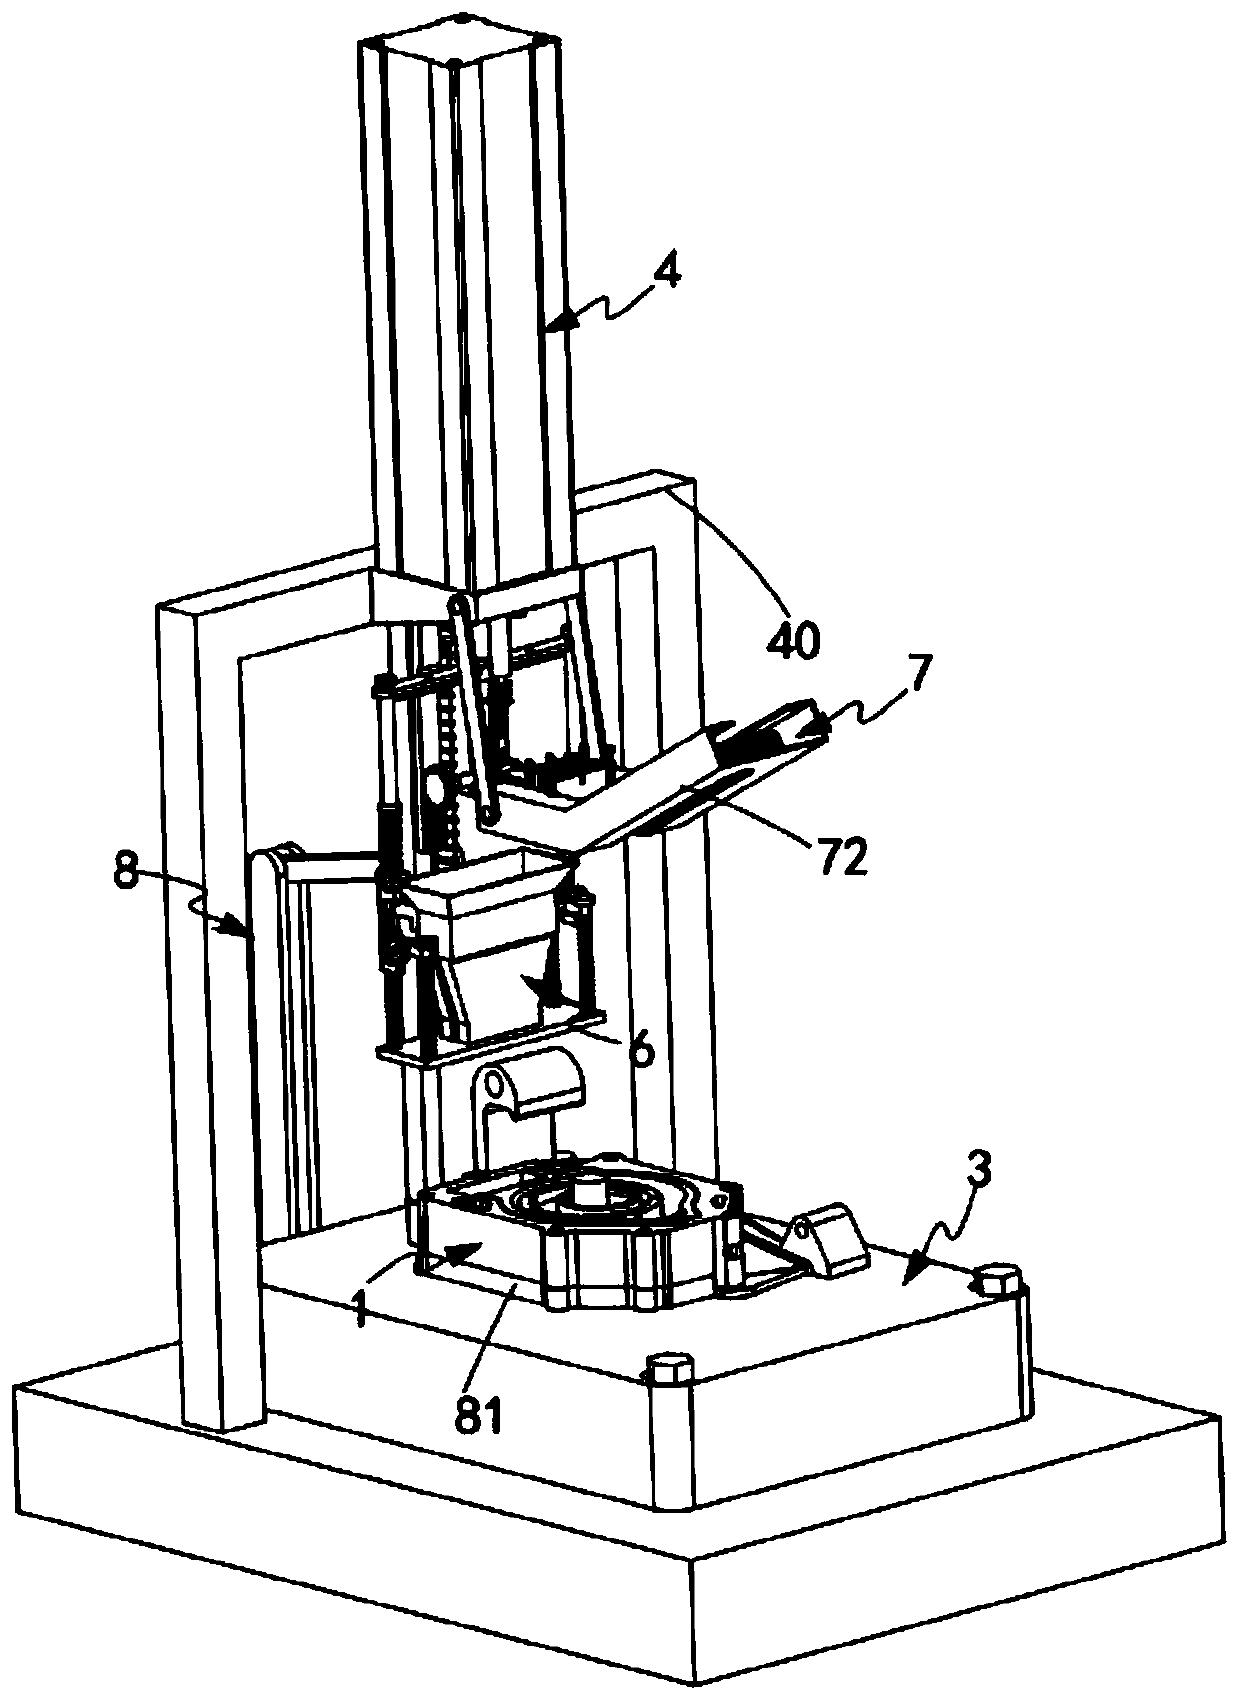 An automatic and precise assembly of an oil pump